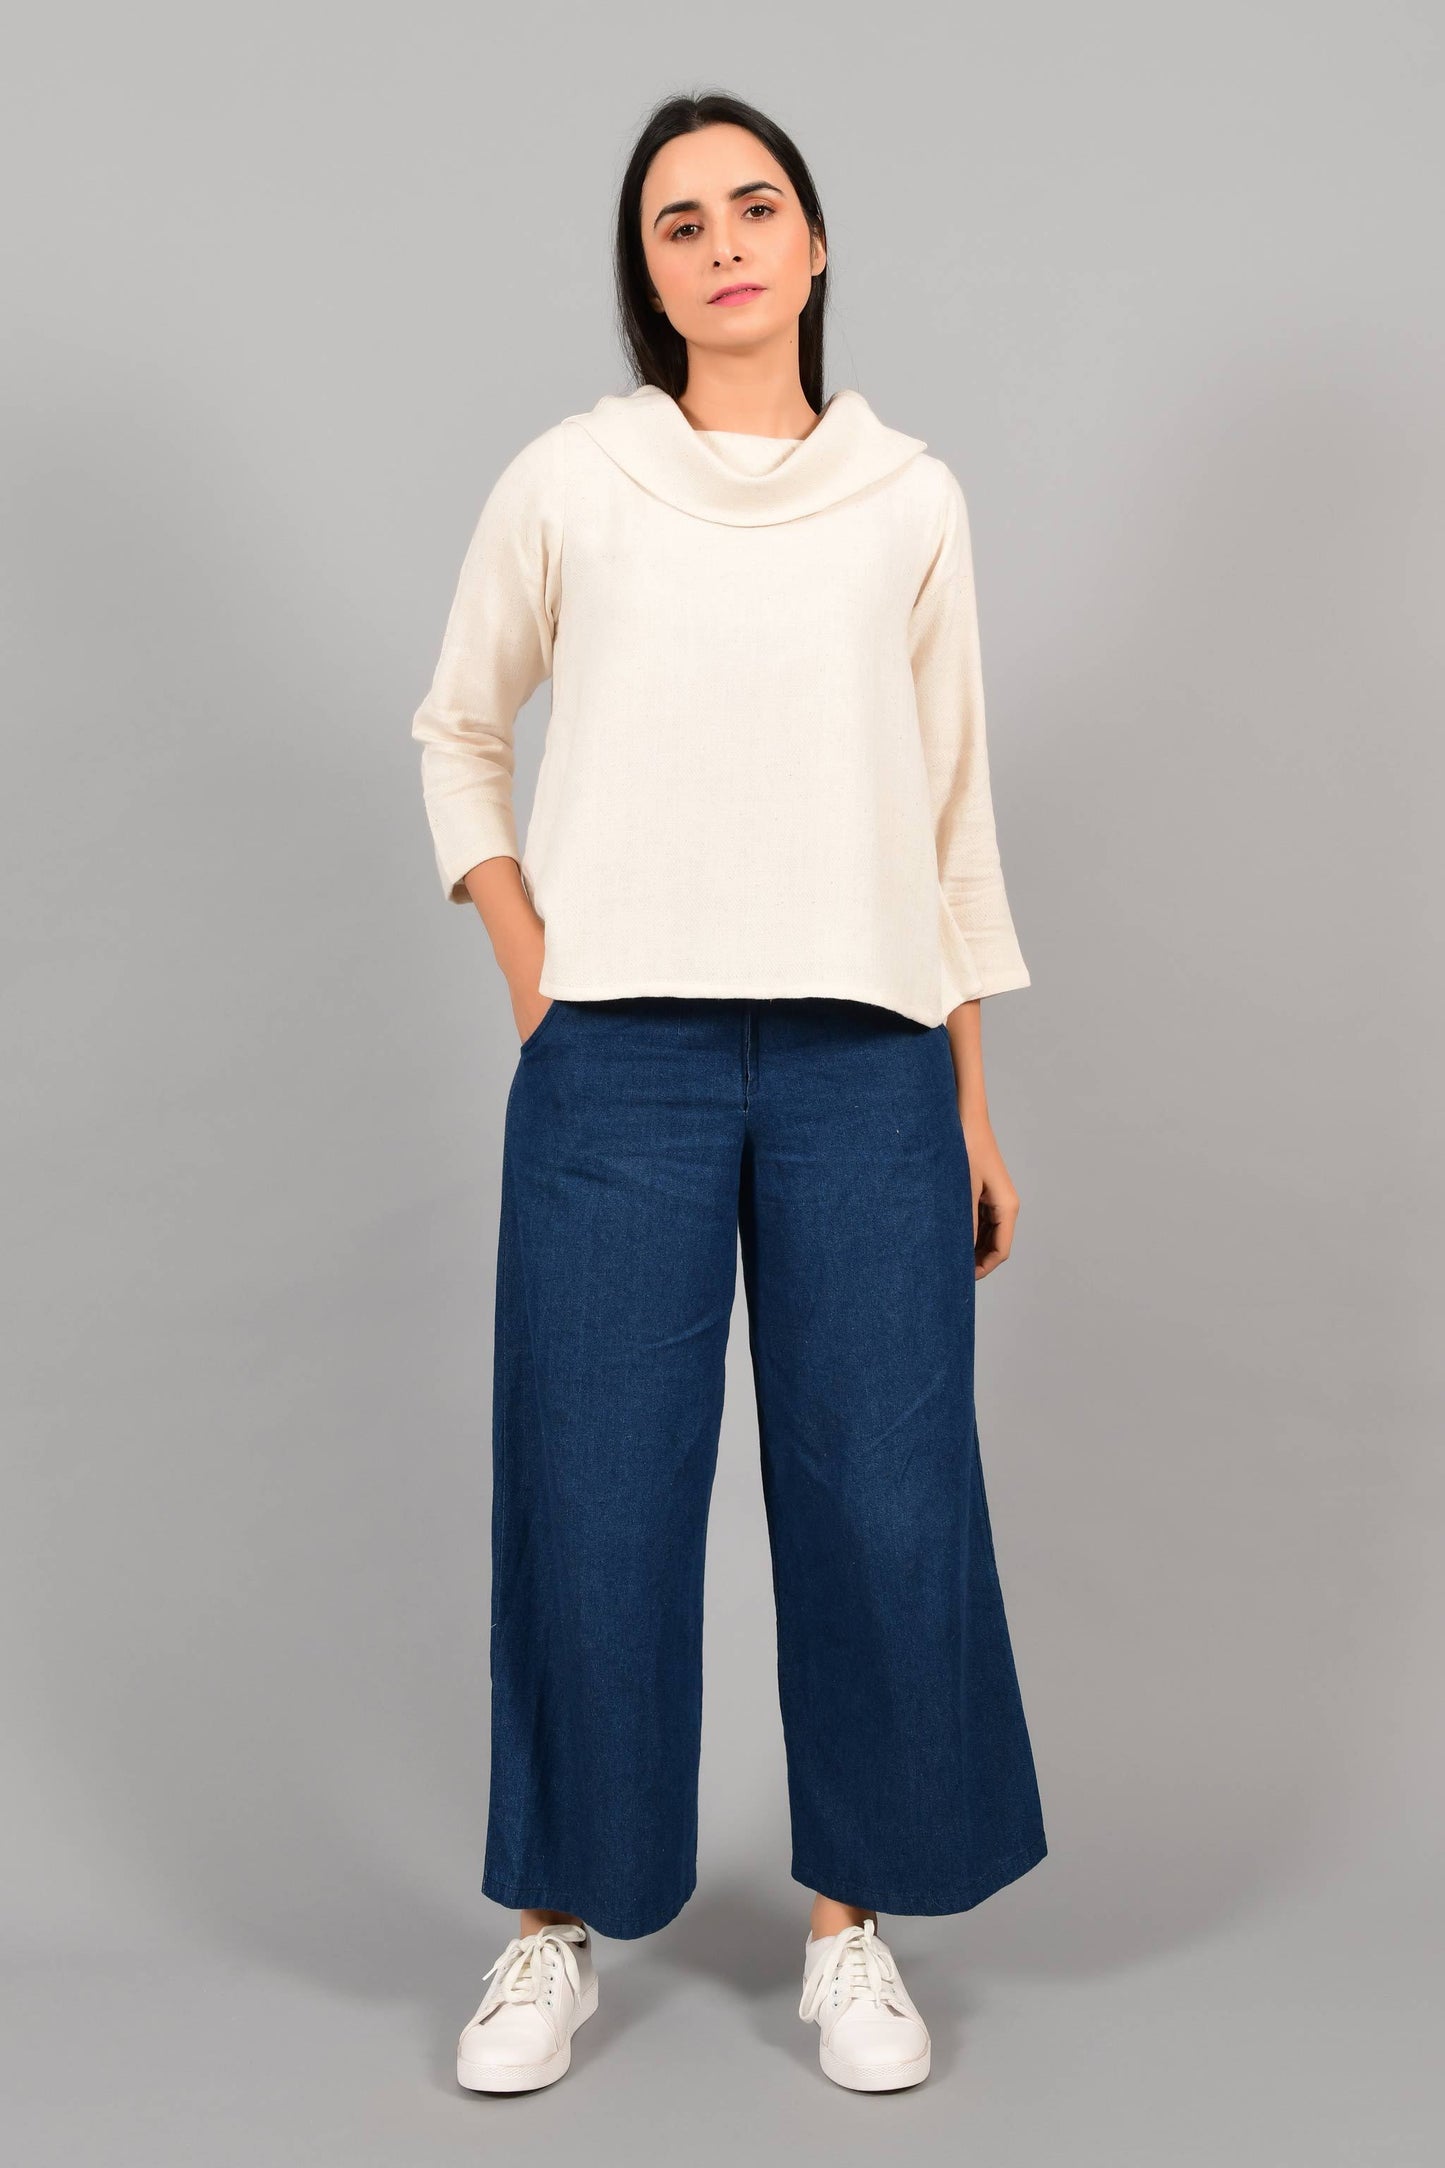 Front pose of an Indian female womenswear fashion model in an off-white Cashmere Cotton Top with cowl neck and quarter sleeves made using handspun and handwoven khadi cotton by Cotton Rack.